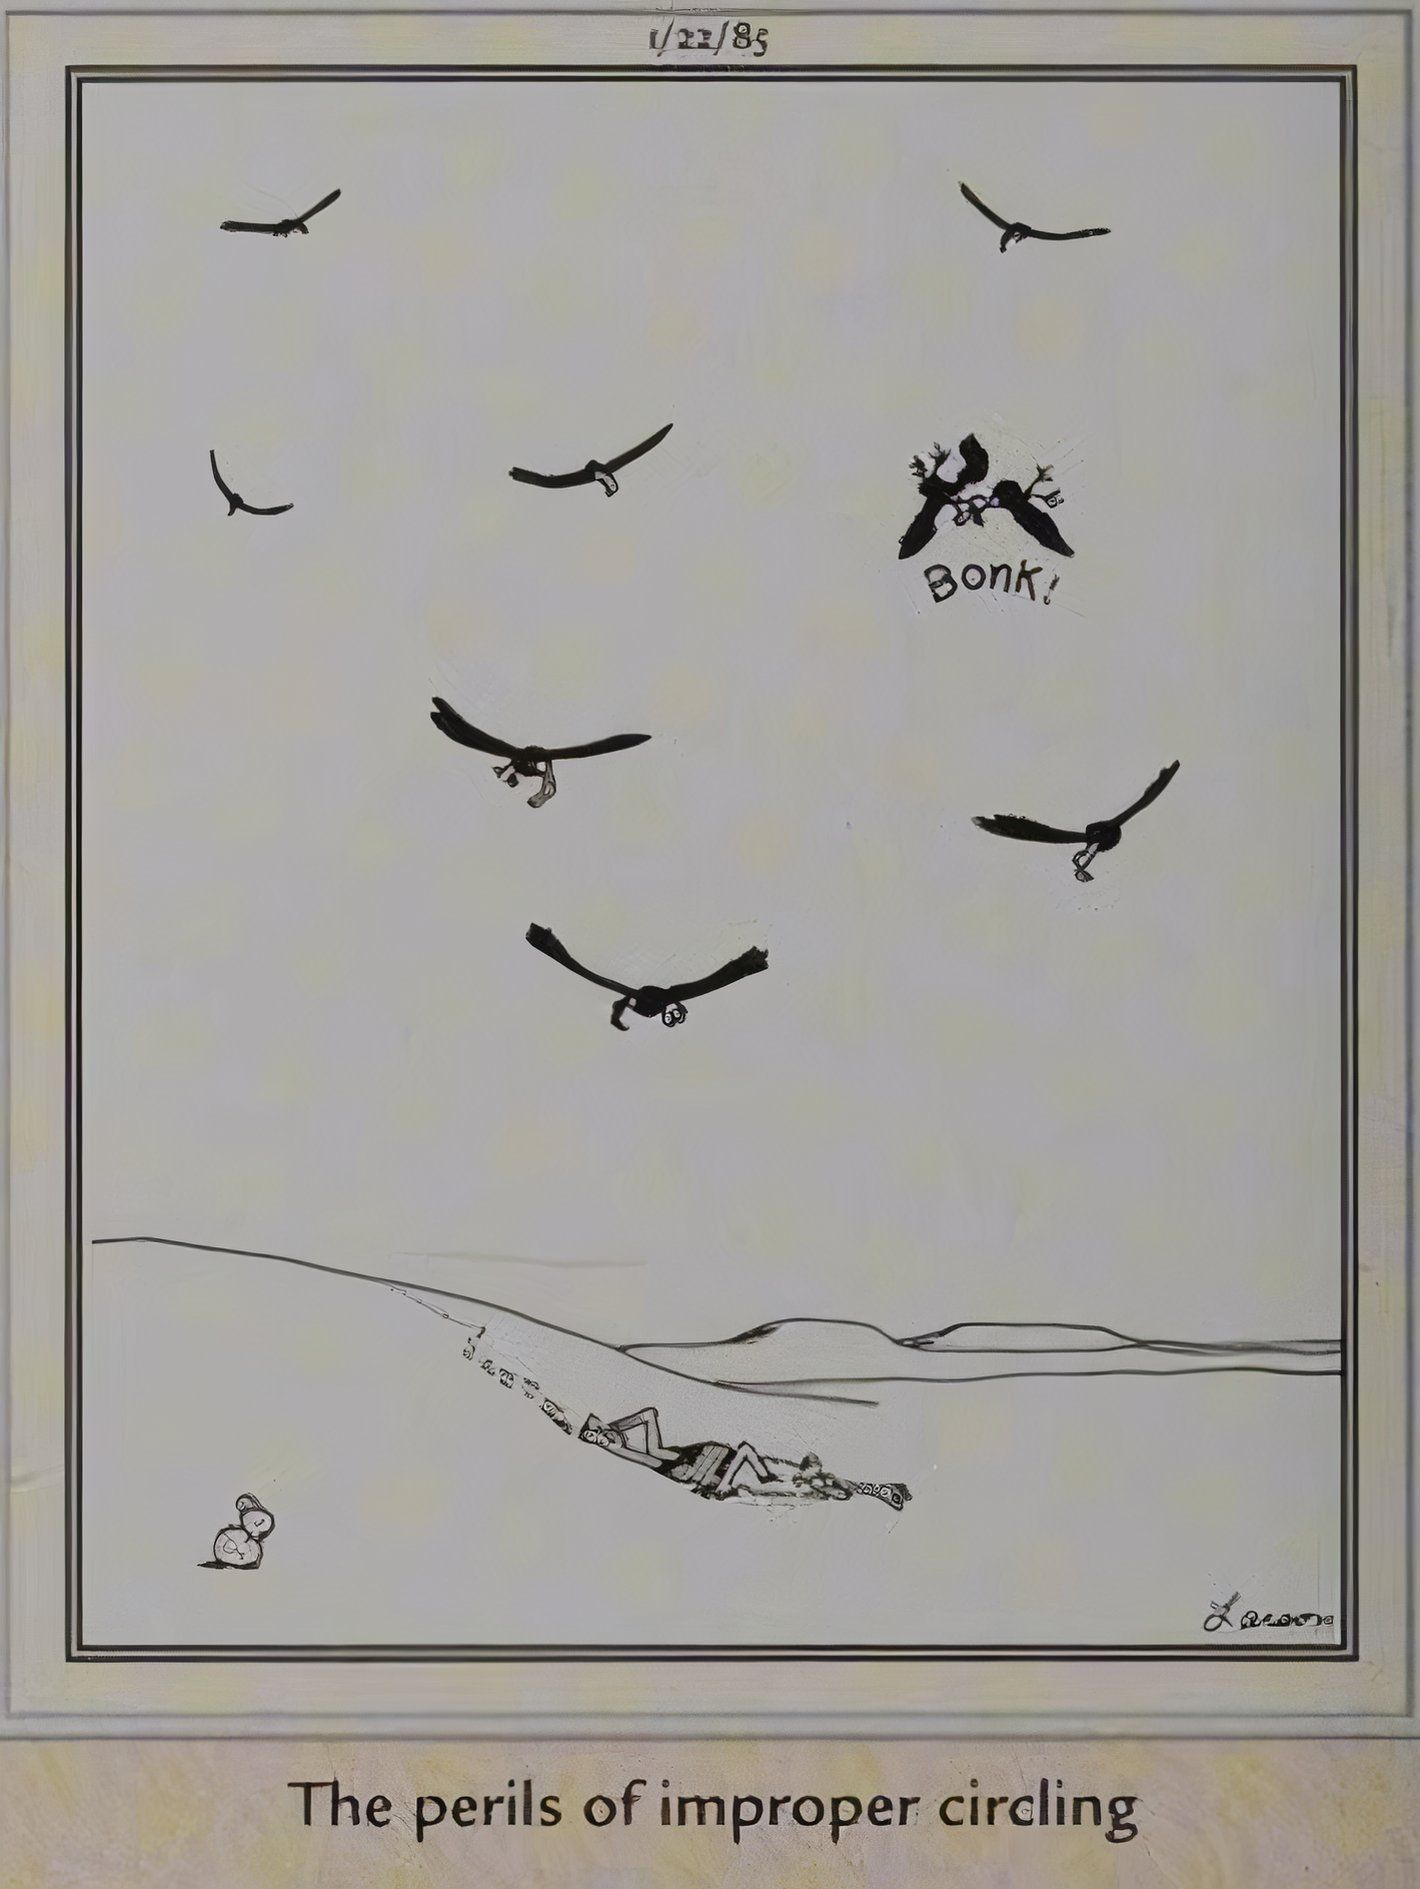 Far Side, two birds of prey collide as they circle a man crawling through the desert